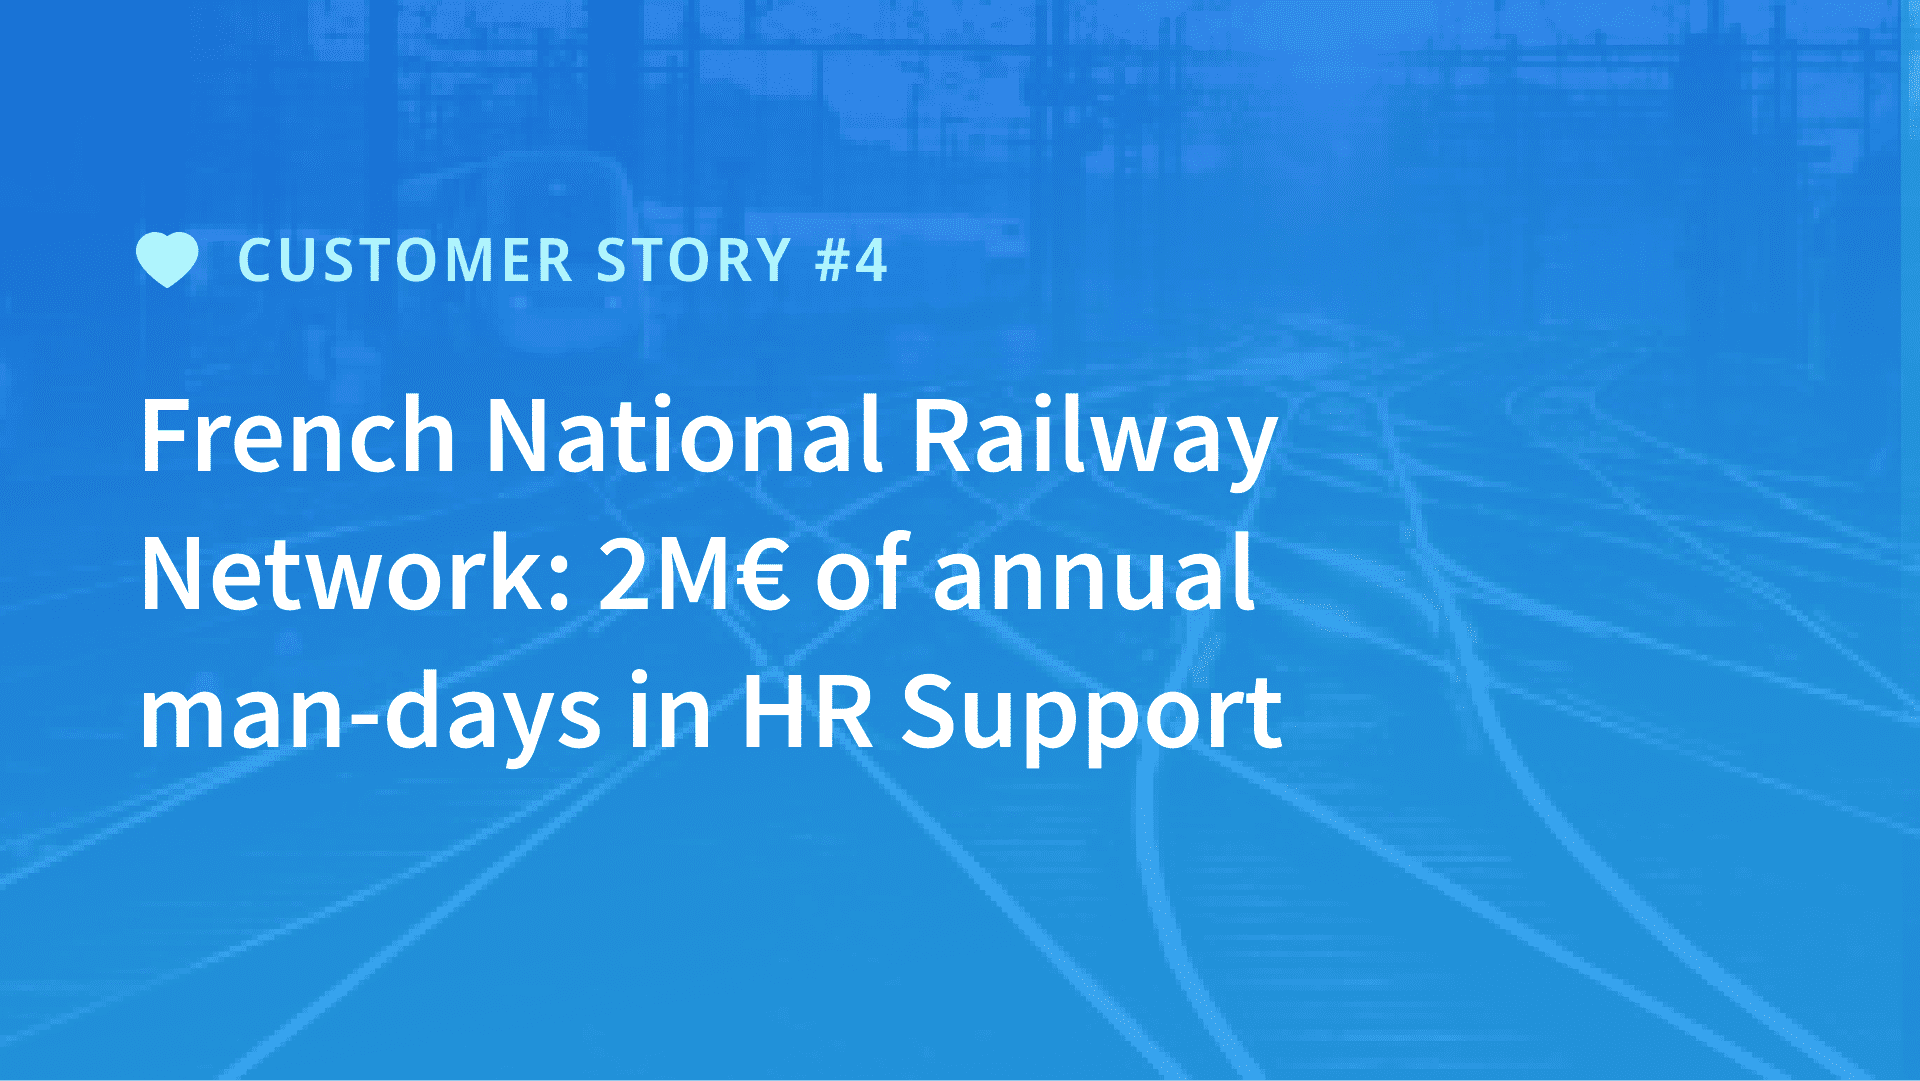 French national railway network: 2M€ of annual man-days in HR support